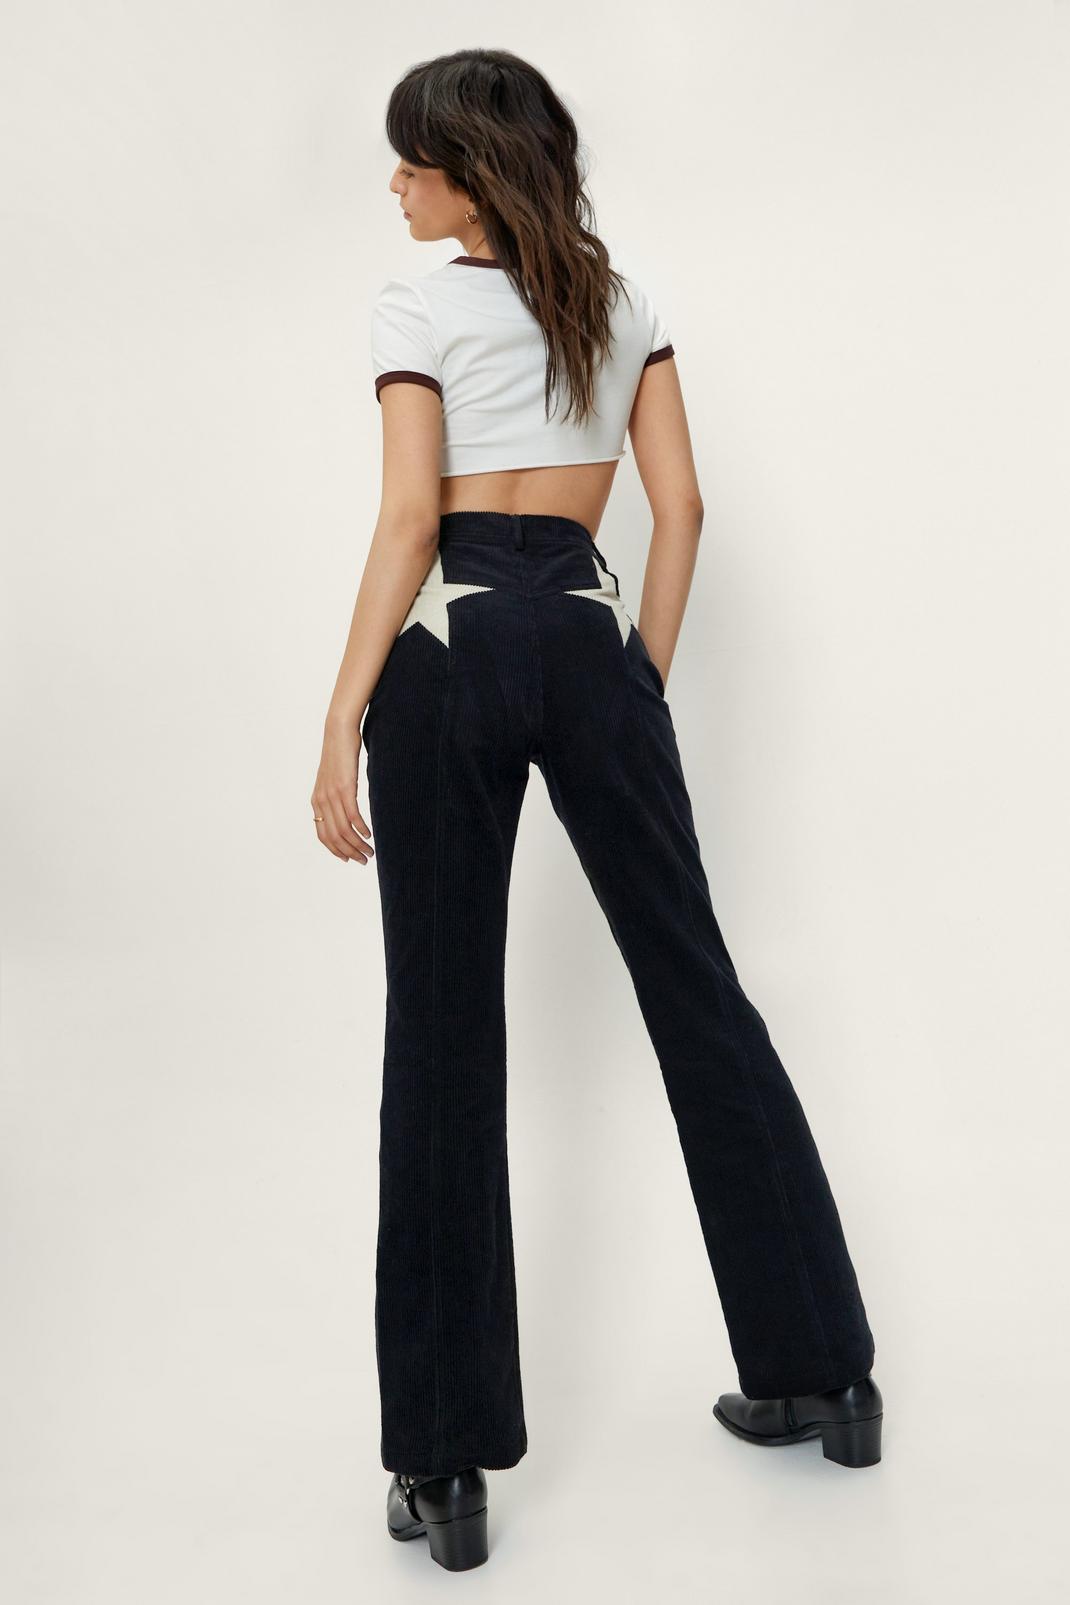 High-waisted flared trousers black - Women